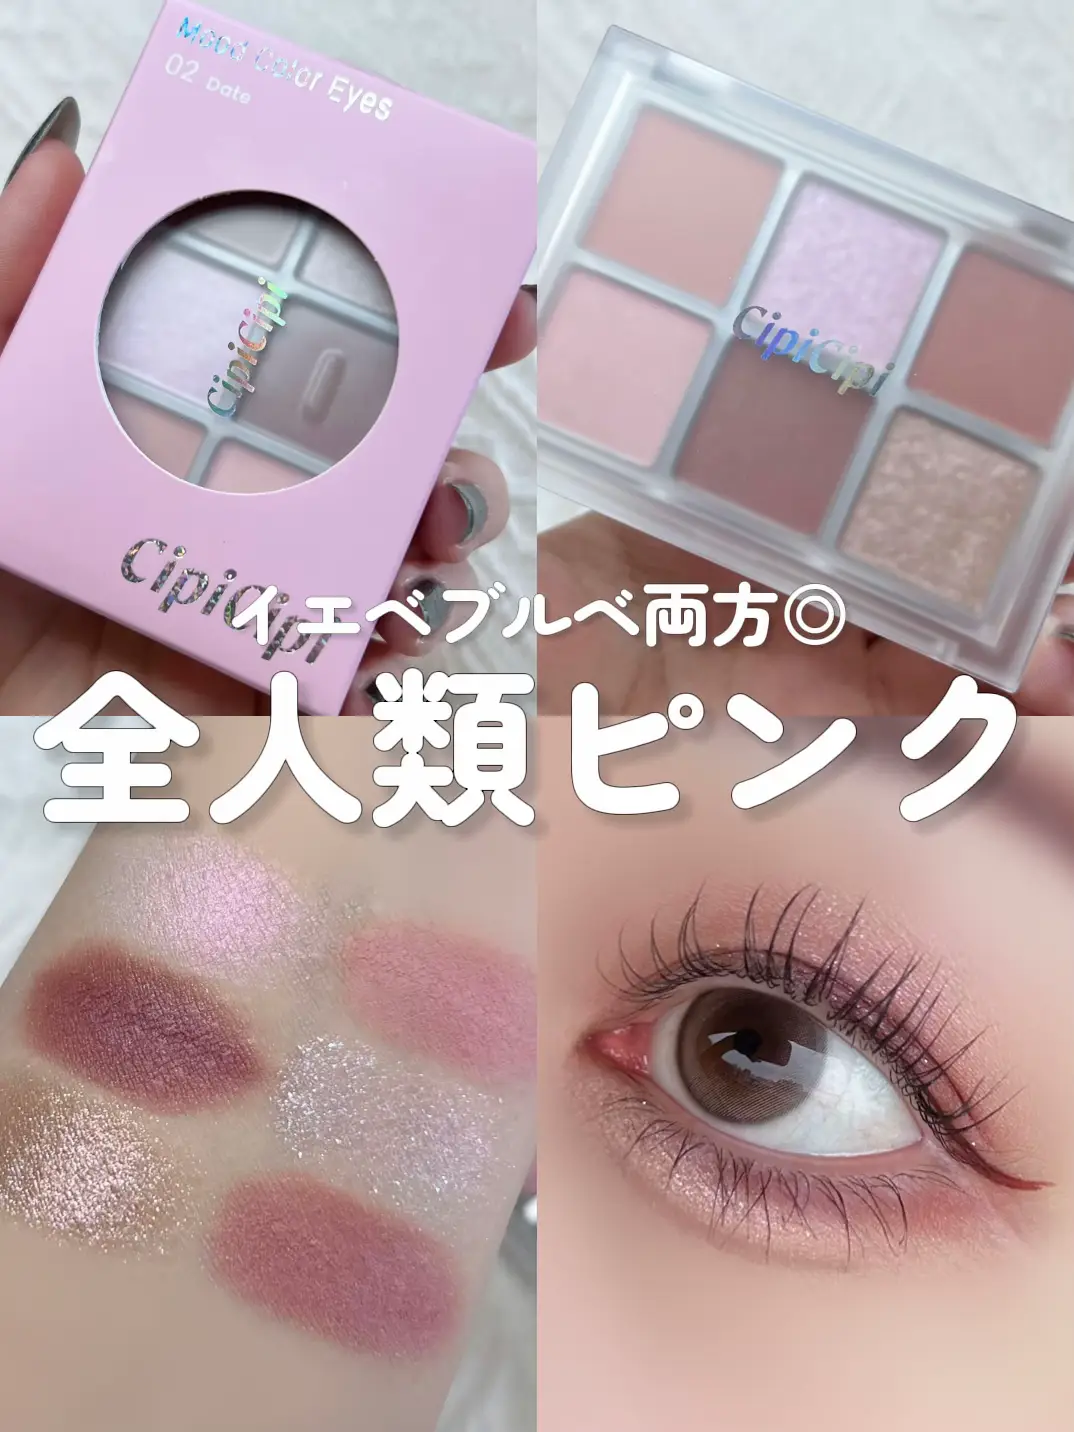 CipiCipi New All Humanity Mote Pink Palette 🎀 / | Gallery posted